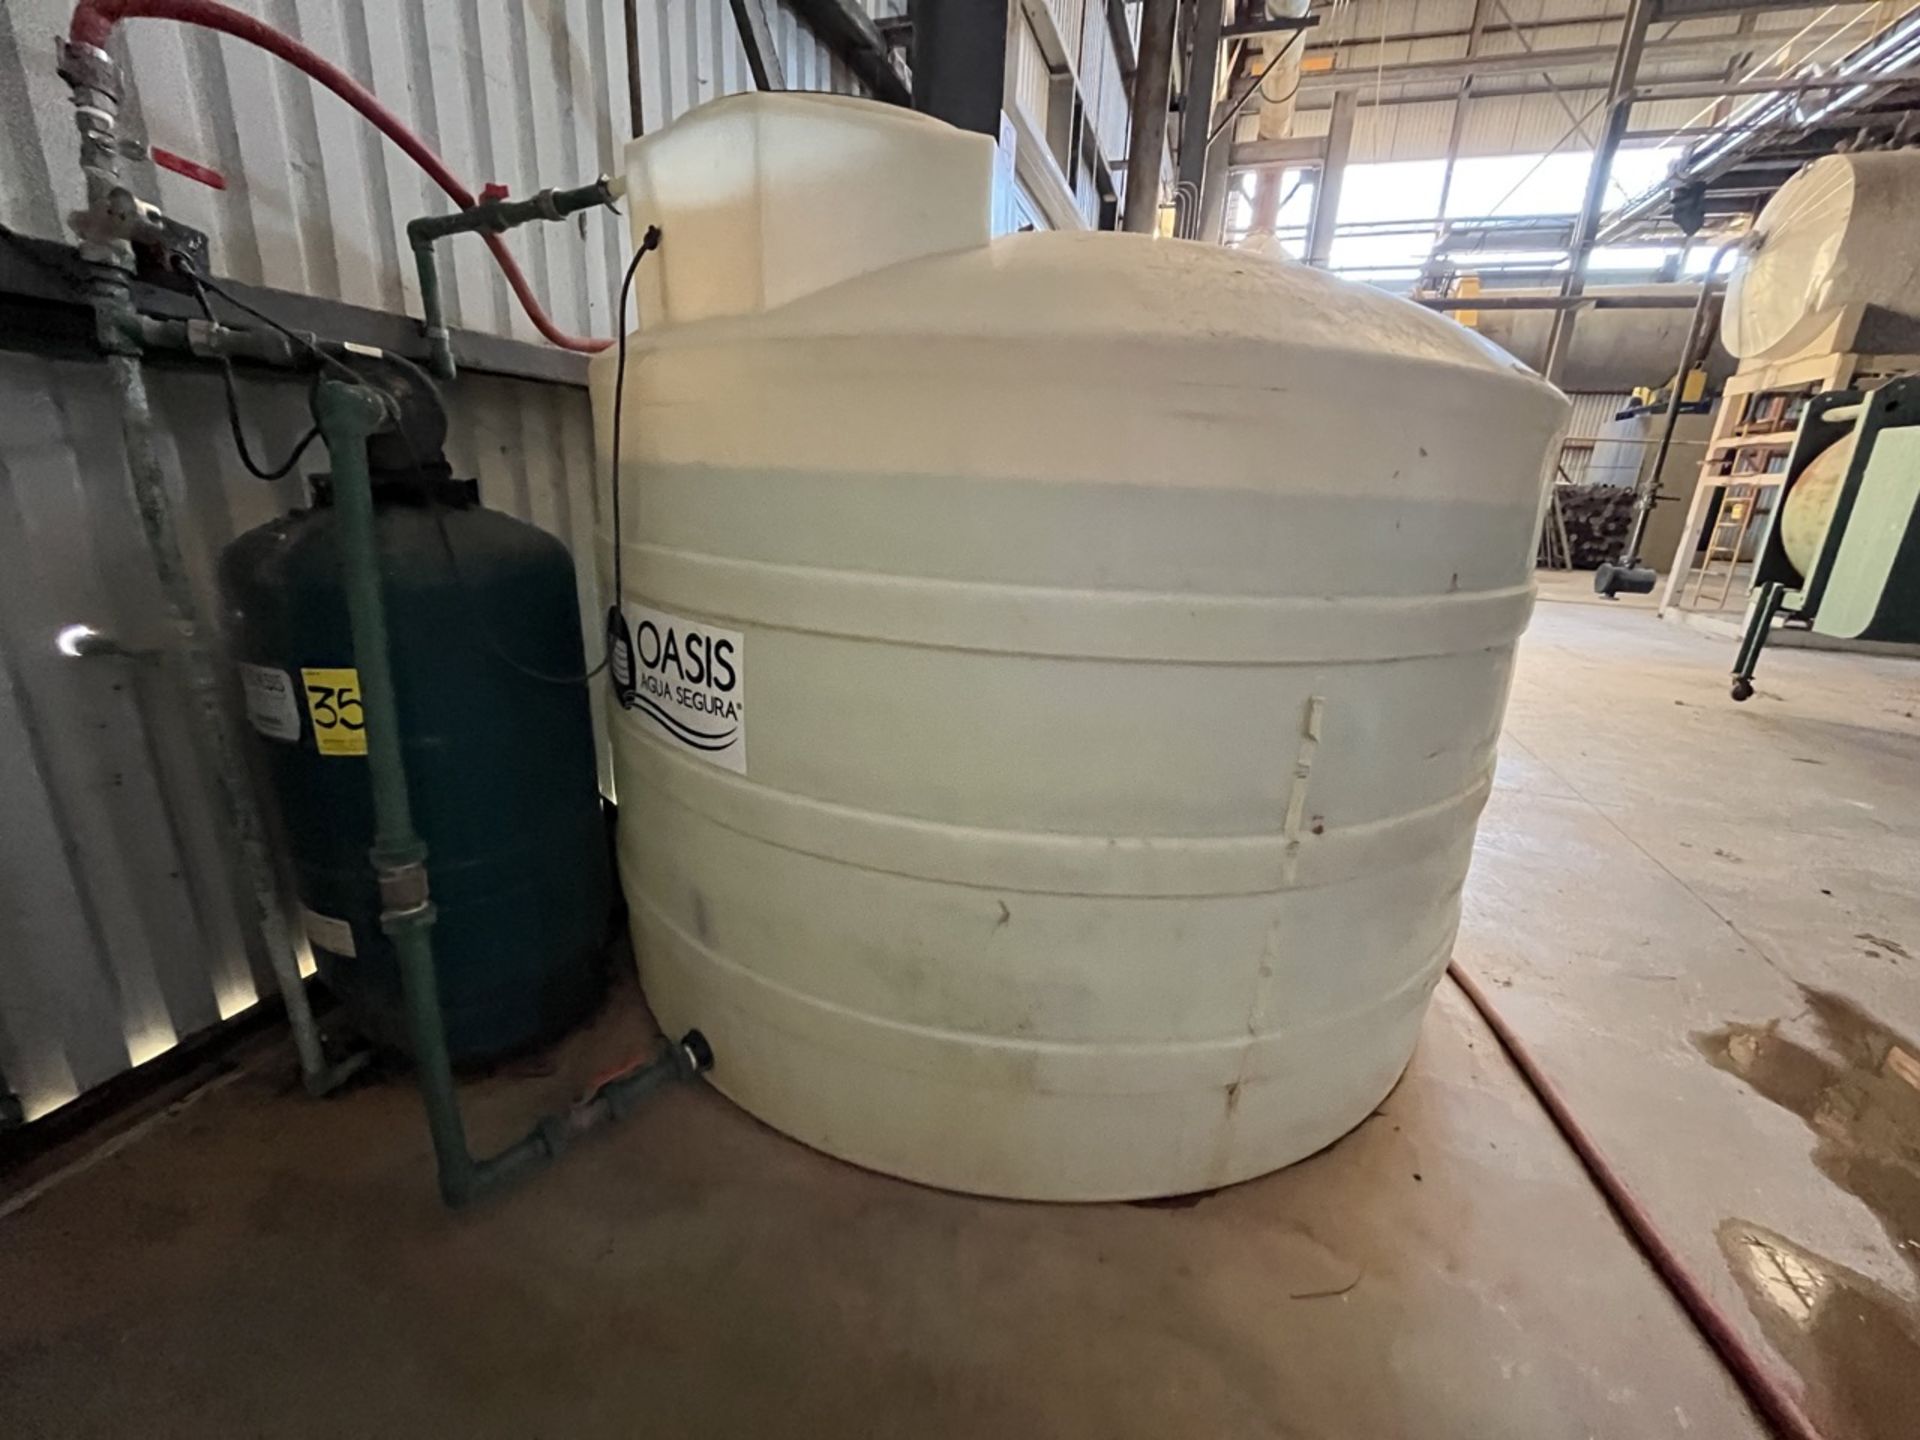 OASIS Water storage tank ,cistern type, capacity of 5 thousand liters approx, measures approx 2.10 - Image 3 of 16